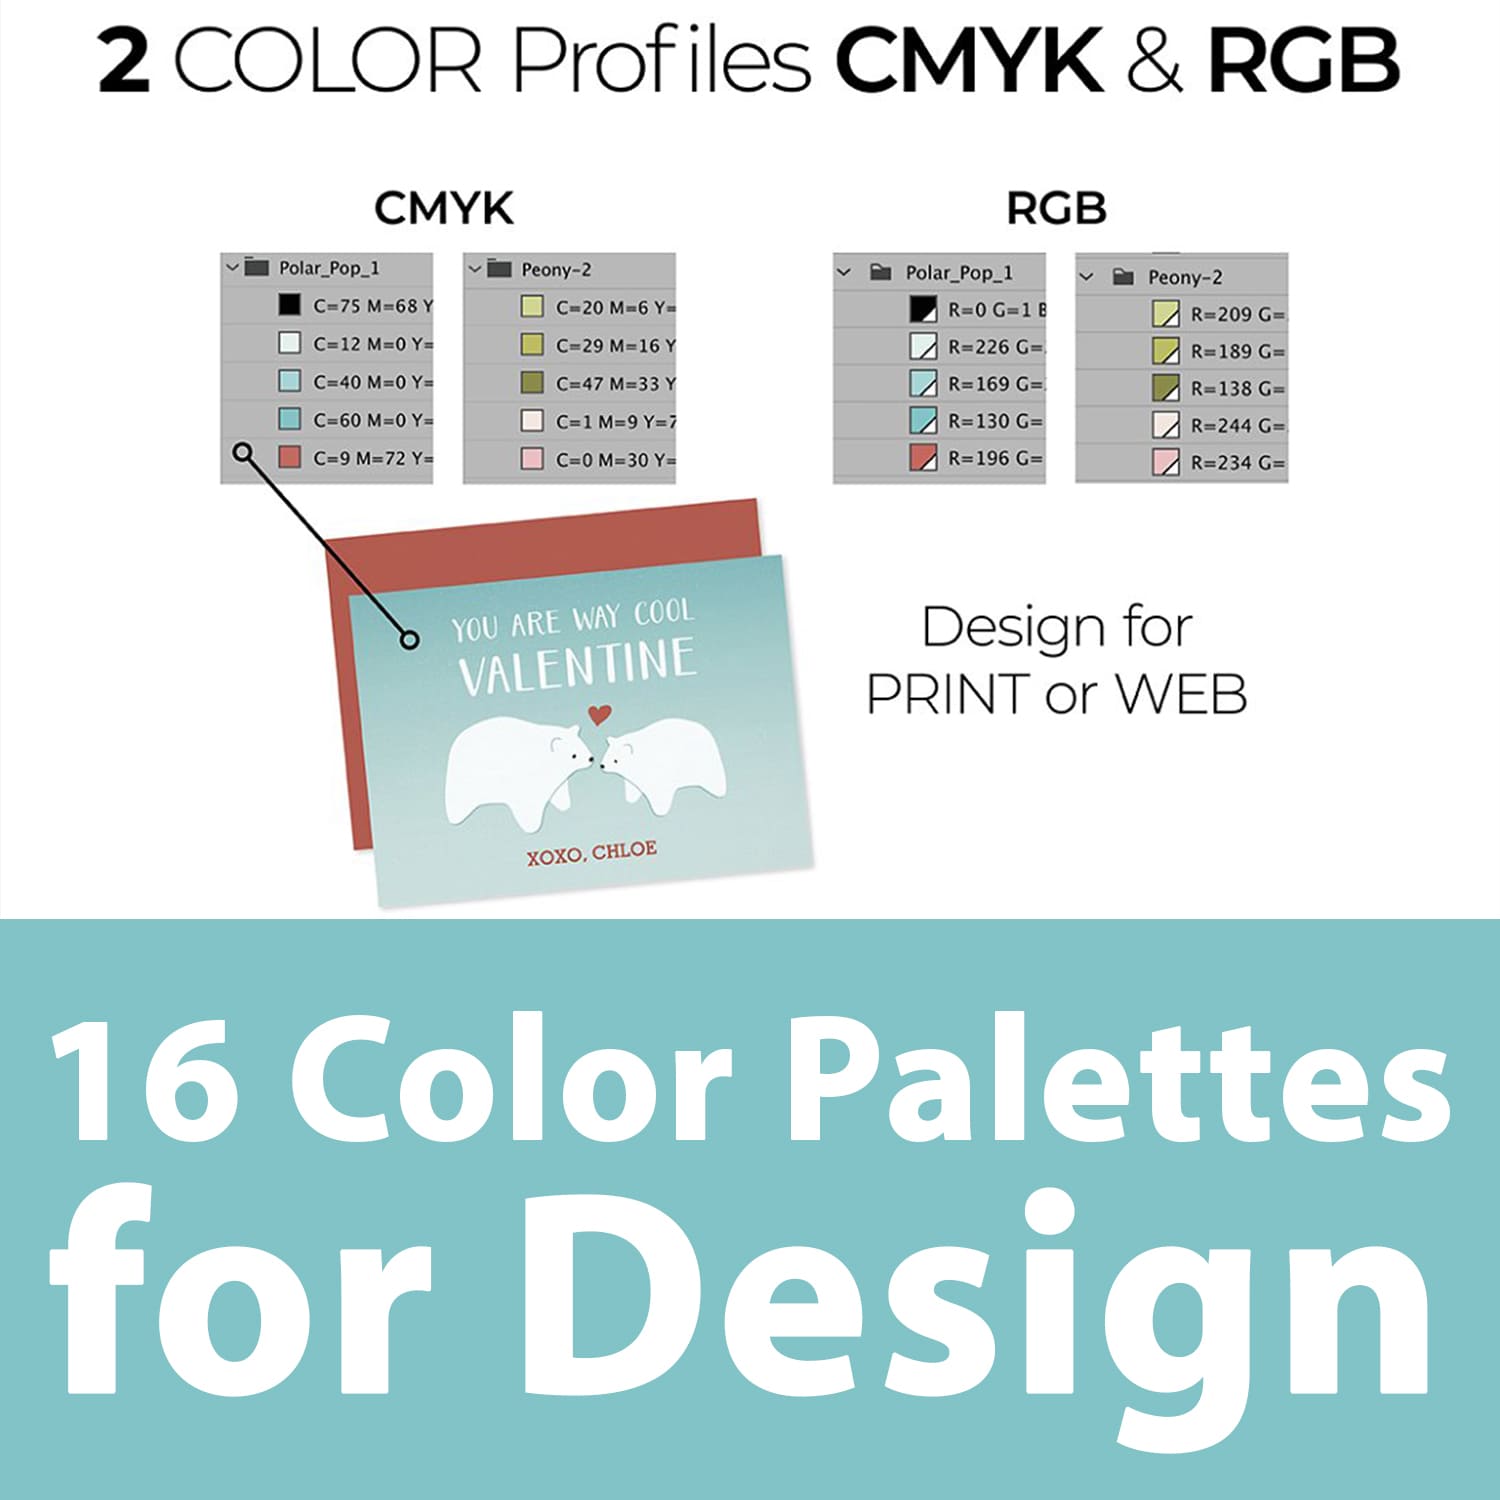 16 Color Palettes For Design - "You Are Way Cool Valentine".